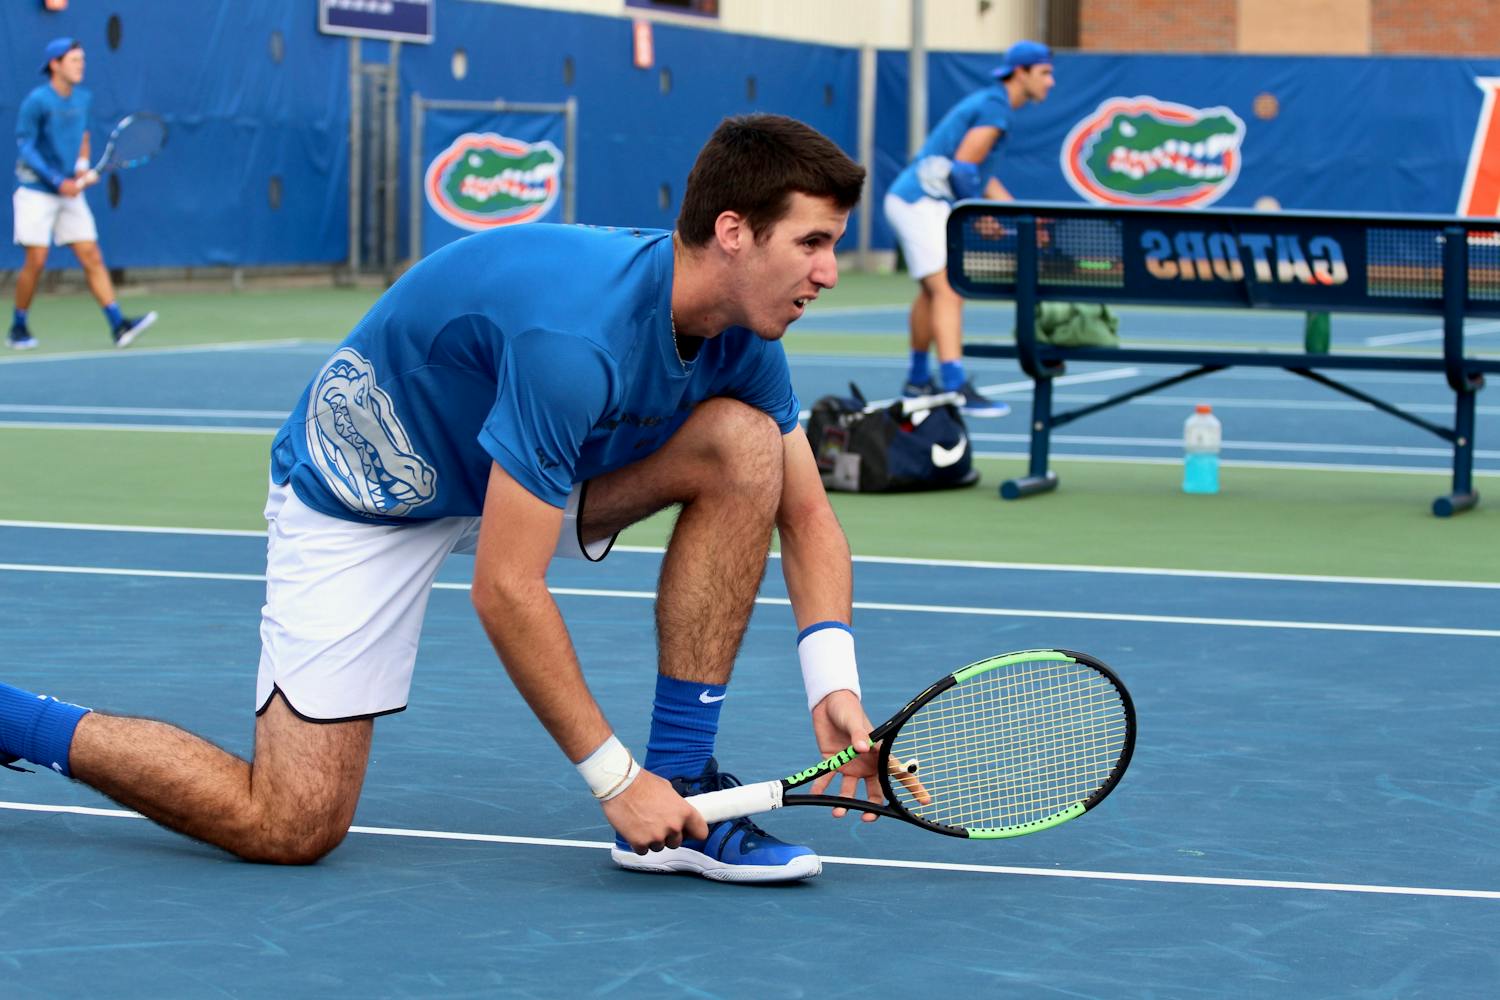 Junior Alfredo Perez and the No. 11 Gators are playing tonight in their first matchup outside of Florida this season. 